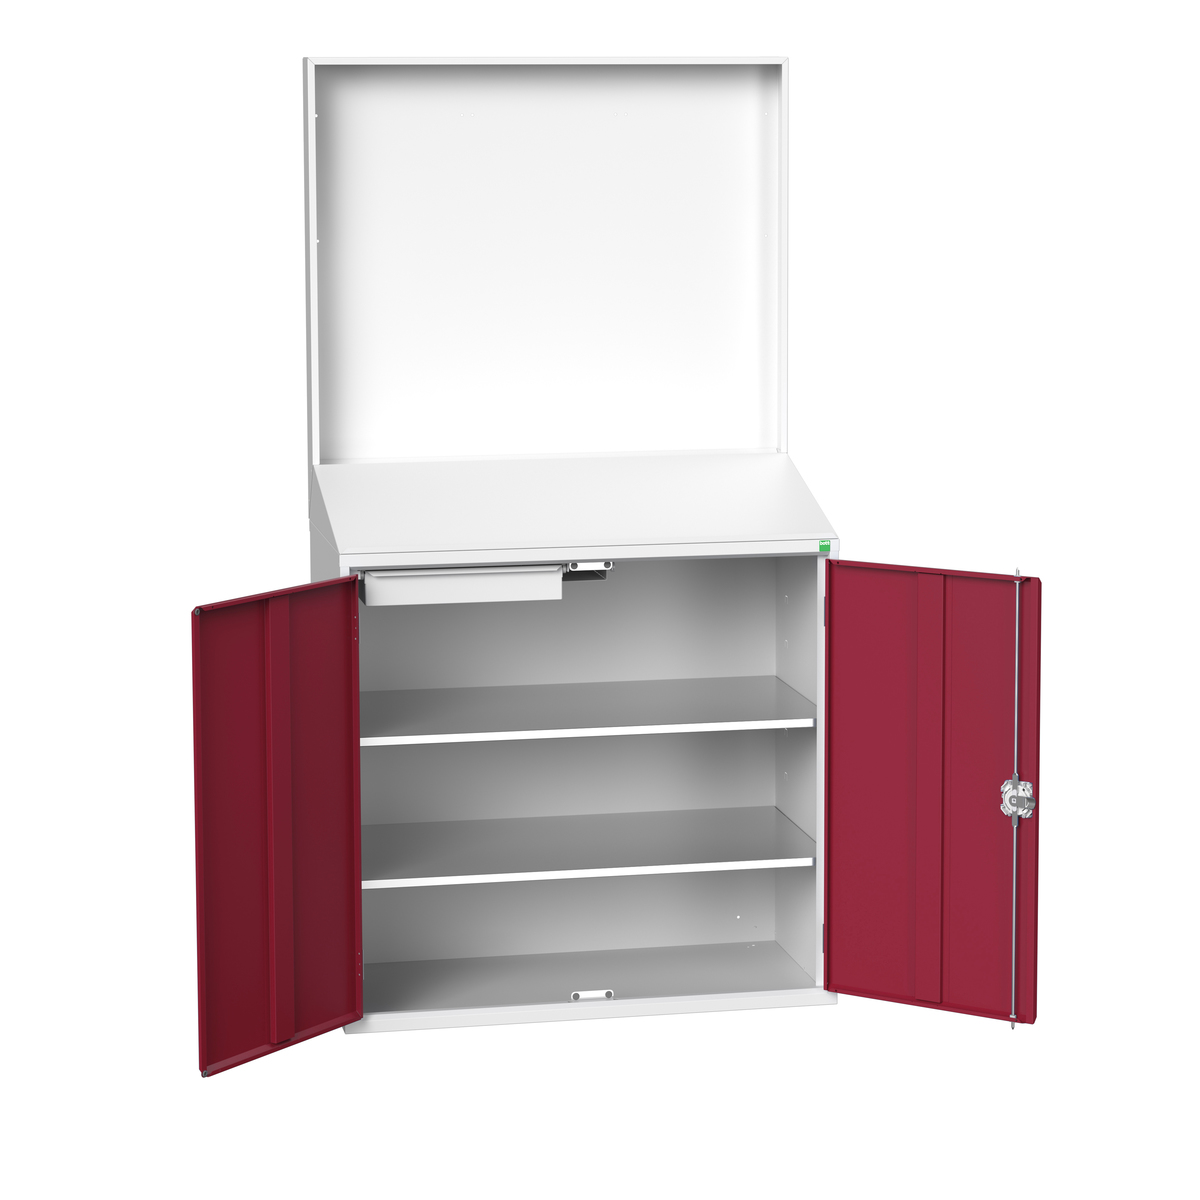 16929217.24 - verso economy lectern with backpanel